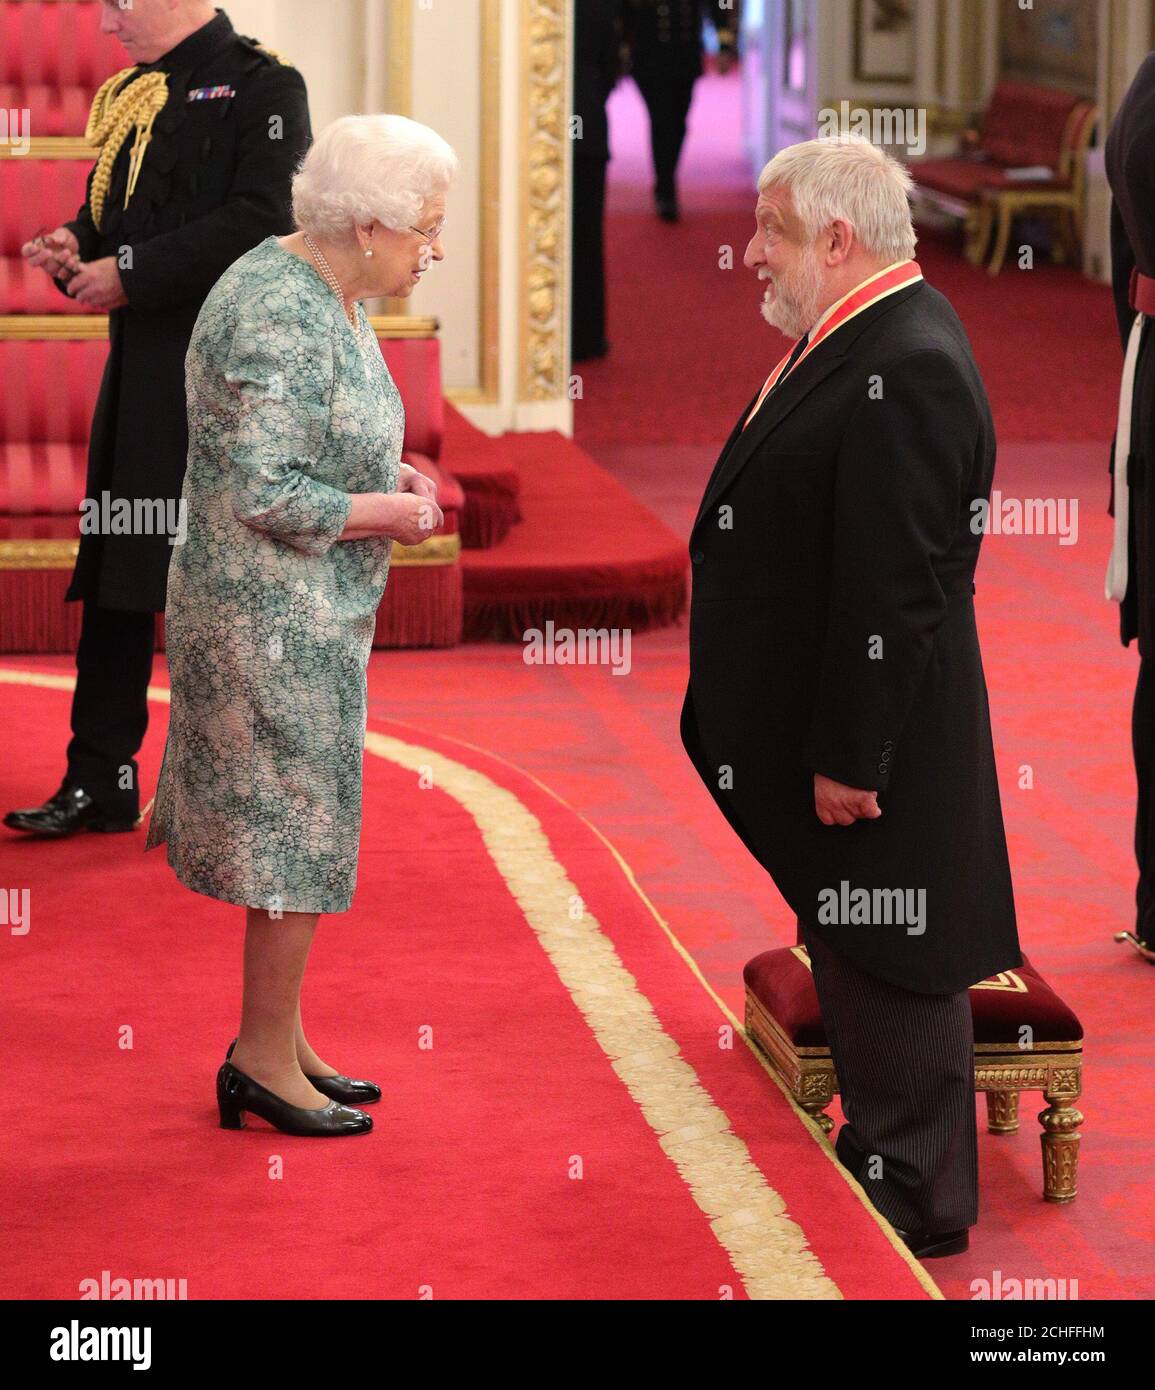 Sir Simon Russell Beale is made a Knight Bachelor of the British Empire by Queen Elizabeth II at Buckingham Palace. Stock Photo